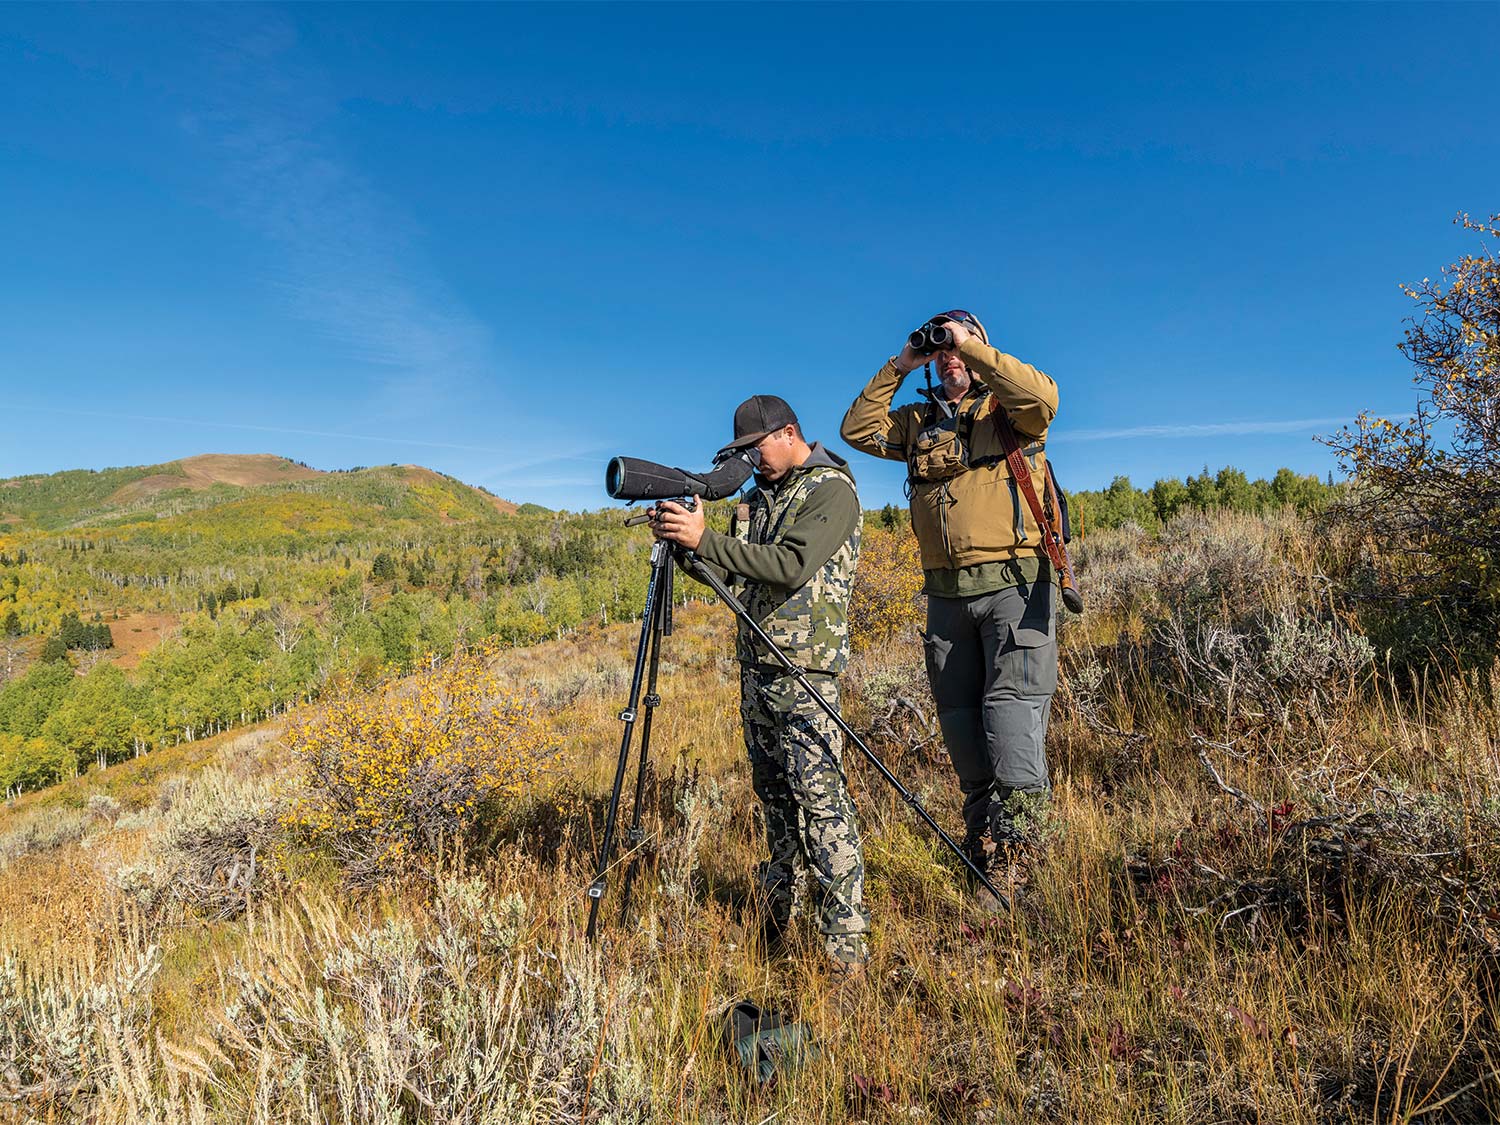 Two hunters stand on a hillside and scout the terrain using spotting scopes and binoculars.